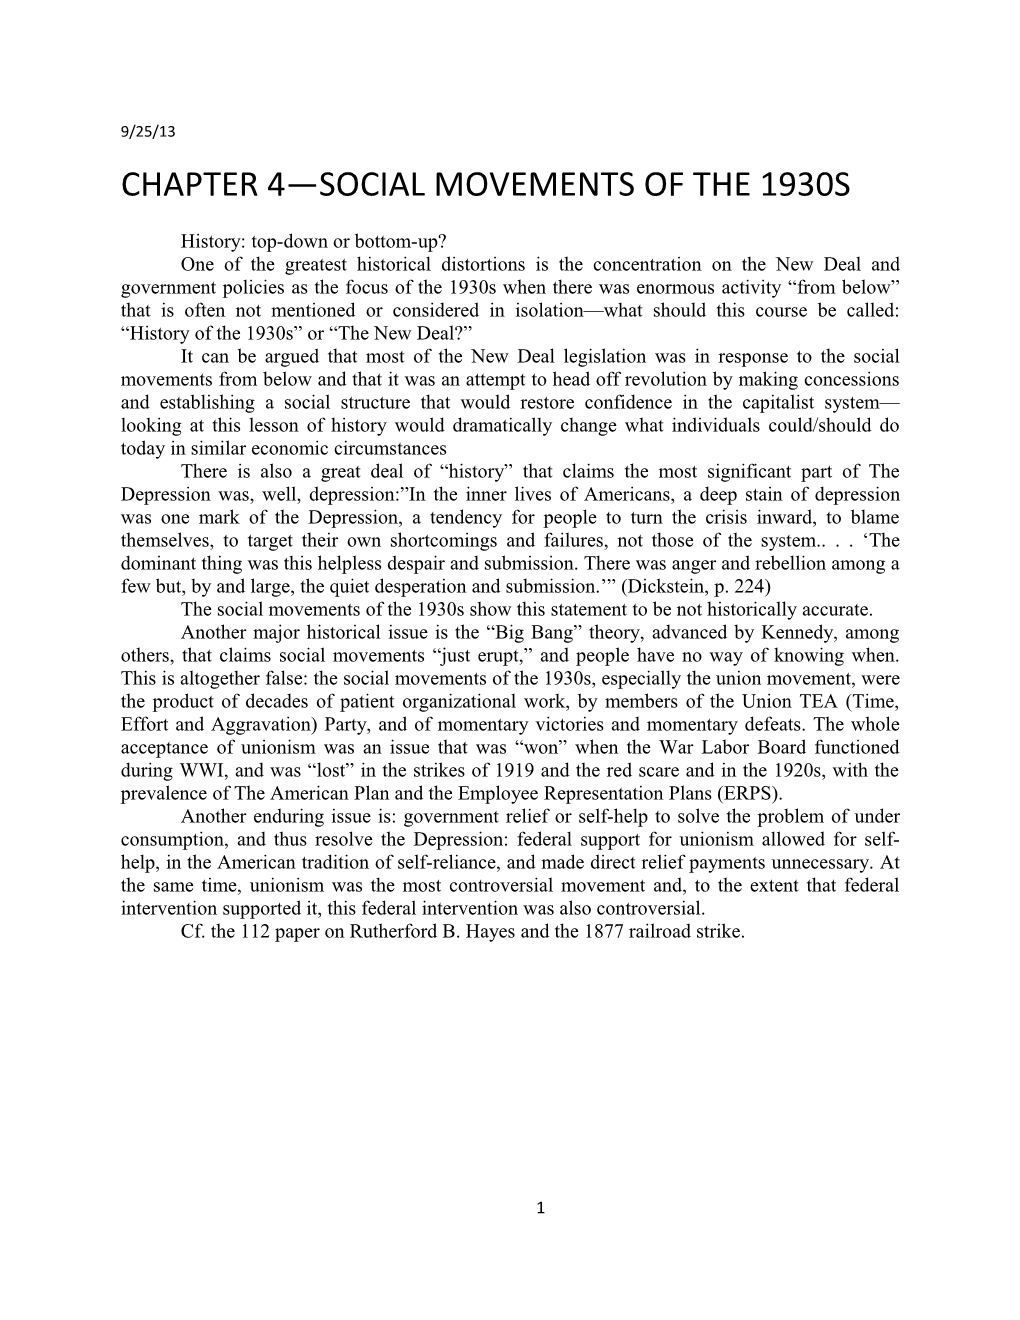 Chapter 4 Social Movements of the 1930S